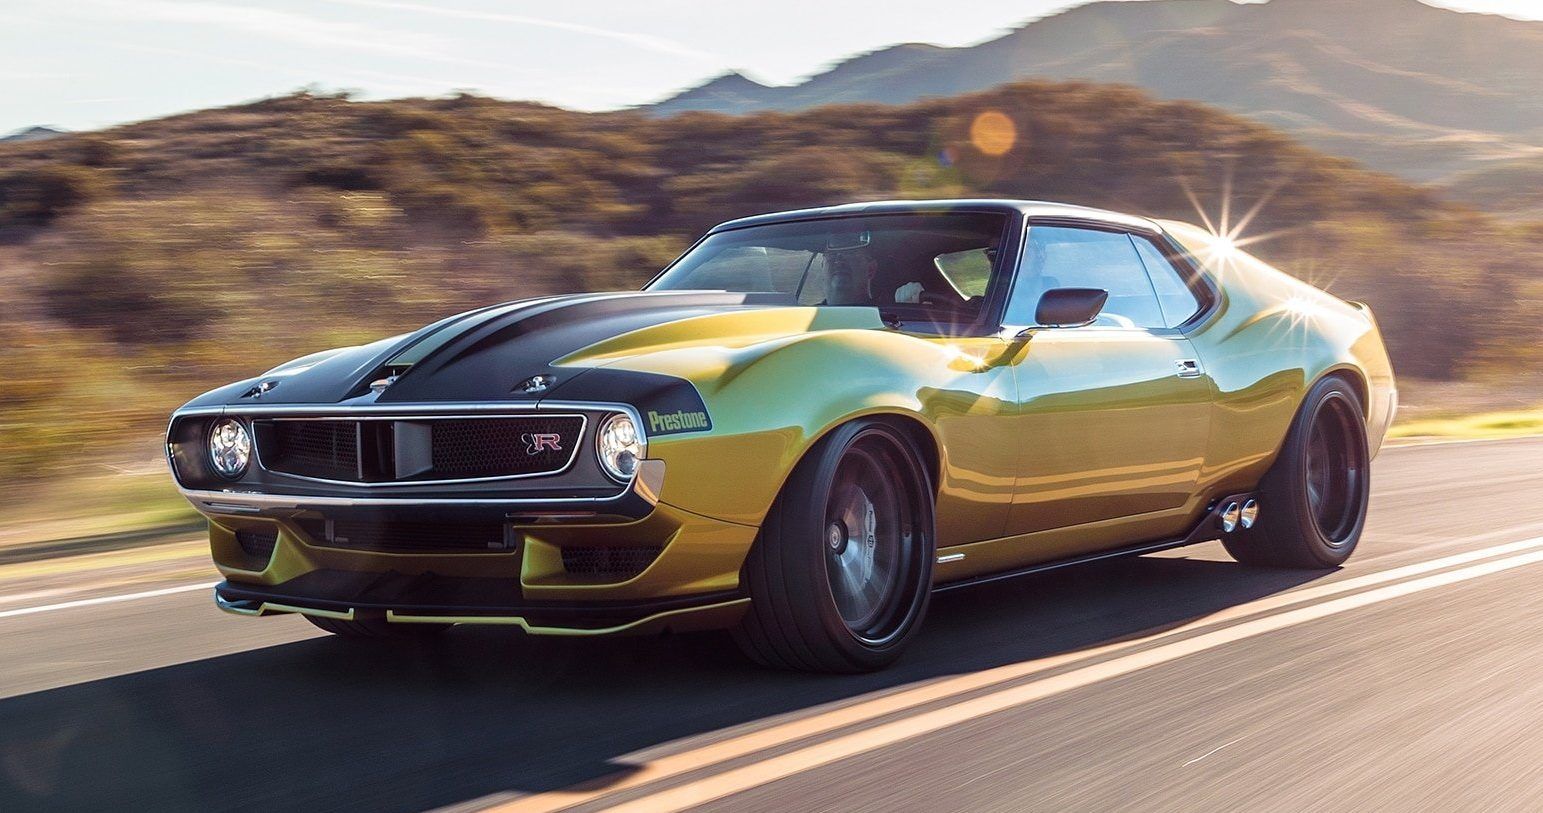 10 Custom Muscle Cars We'd Blow Our Savings On